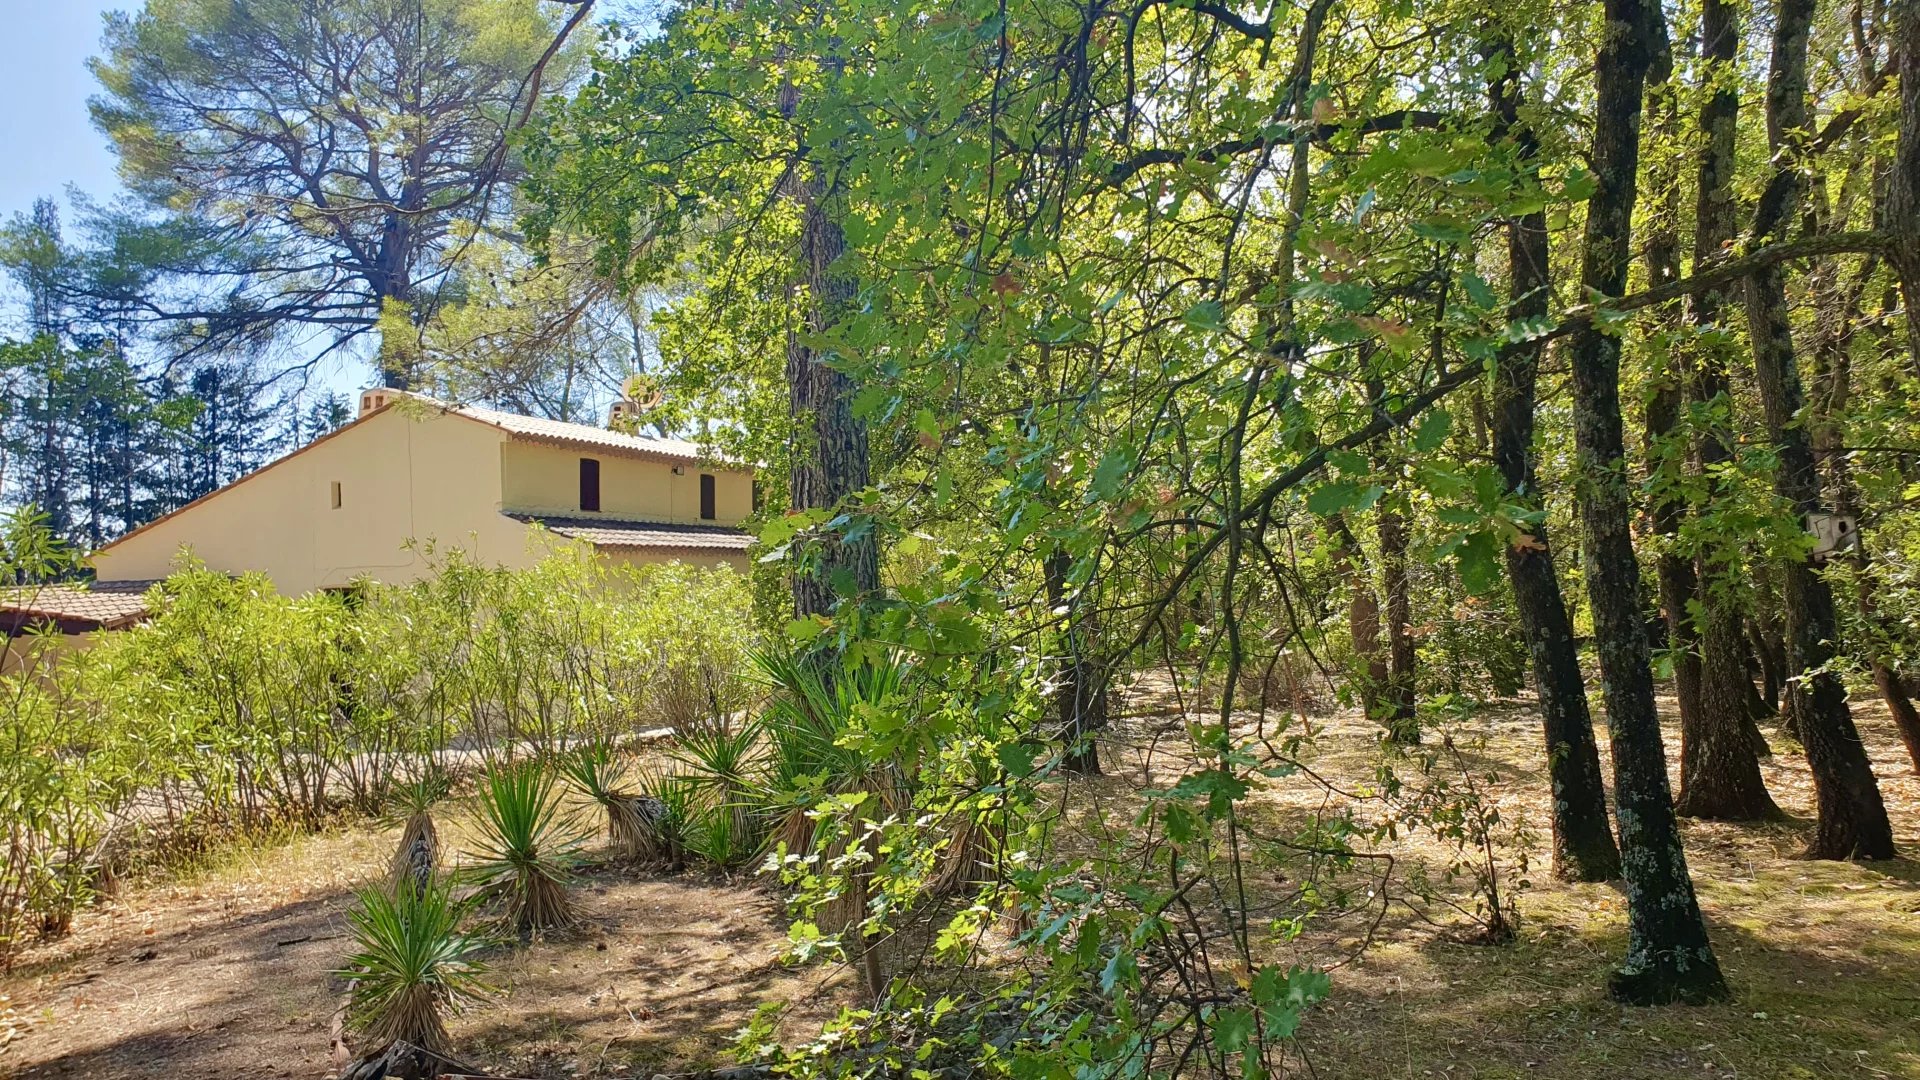 Villa with pool to be renovated in Figanieres.